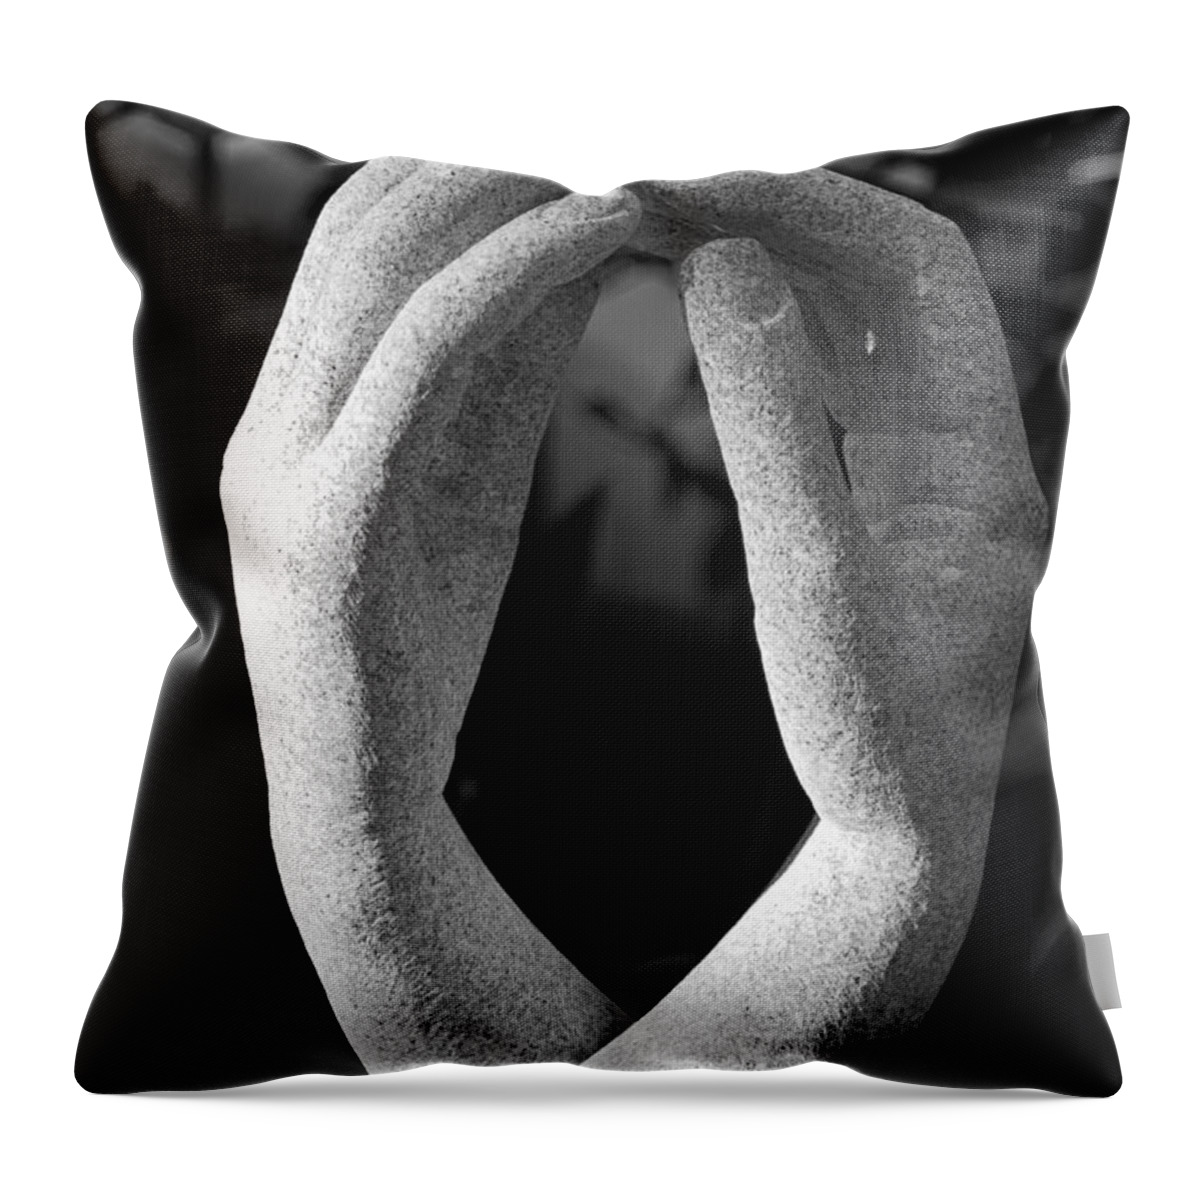 Isolated Throw Pillow featuring the photograph Hands by Paulo Goncalves